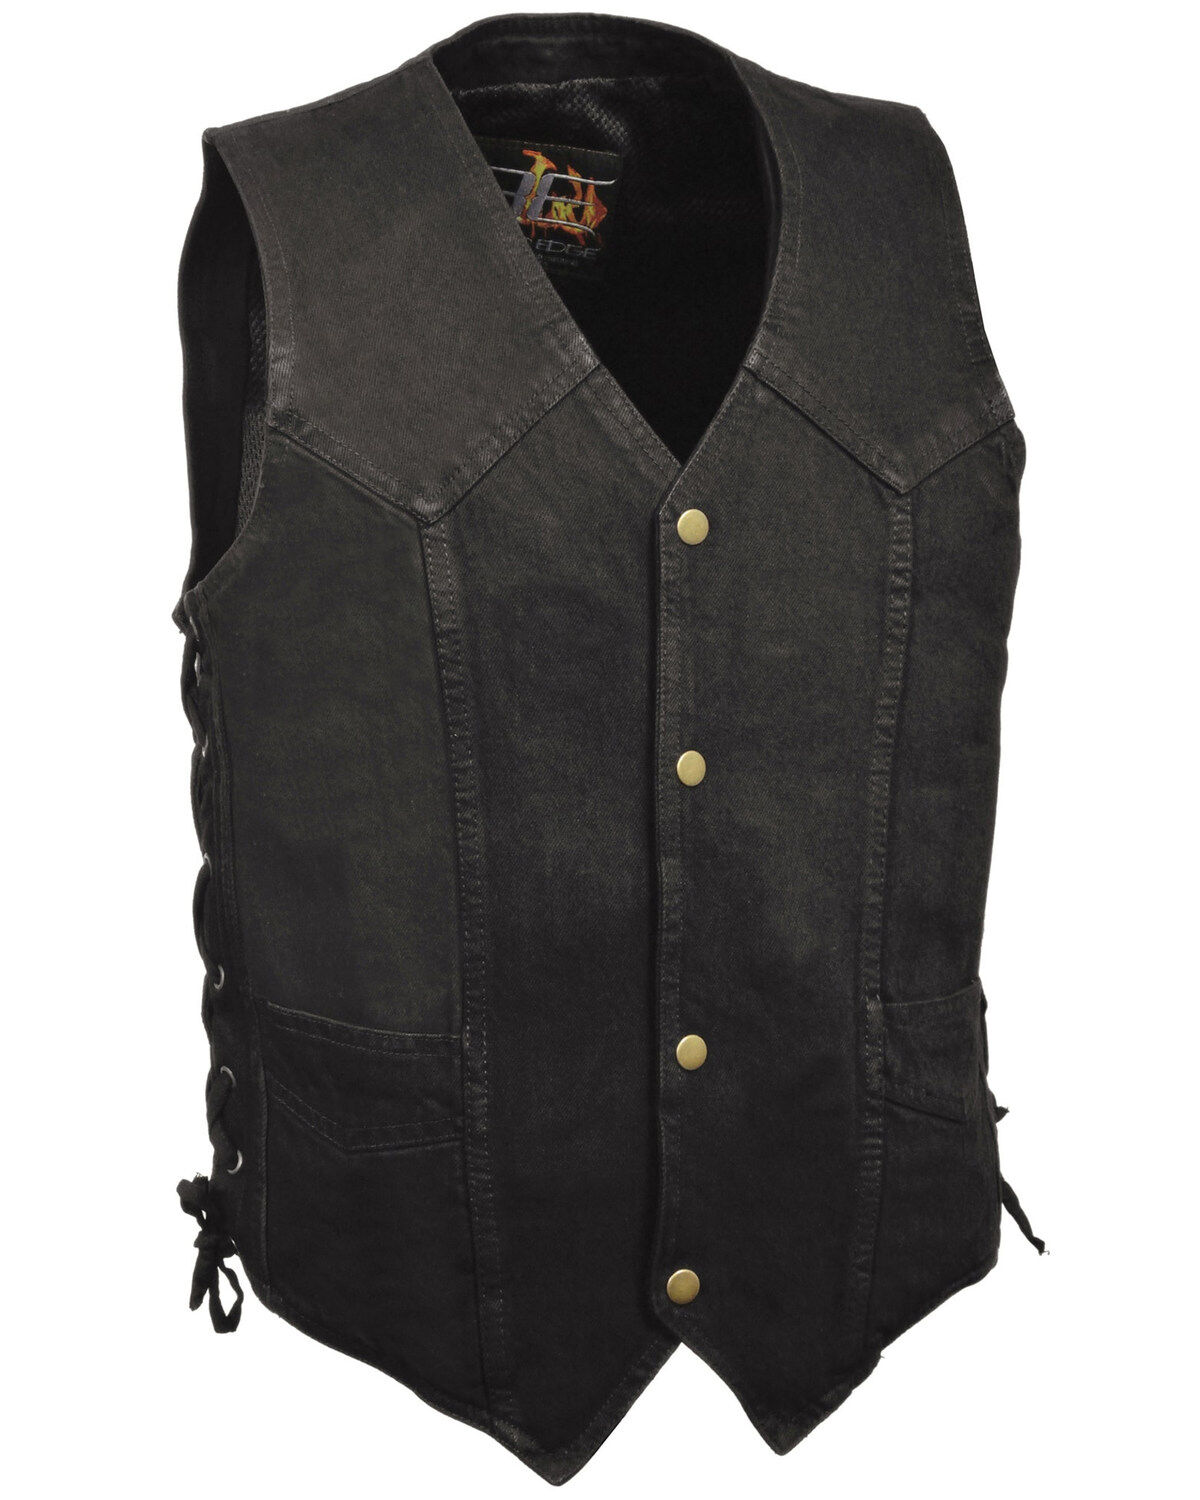 Milwaukee Womens Snap Front Leather Vest Black, X-Large 